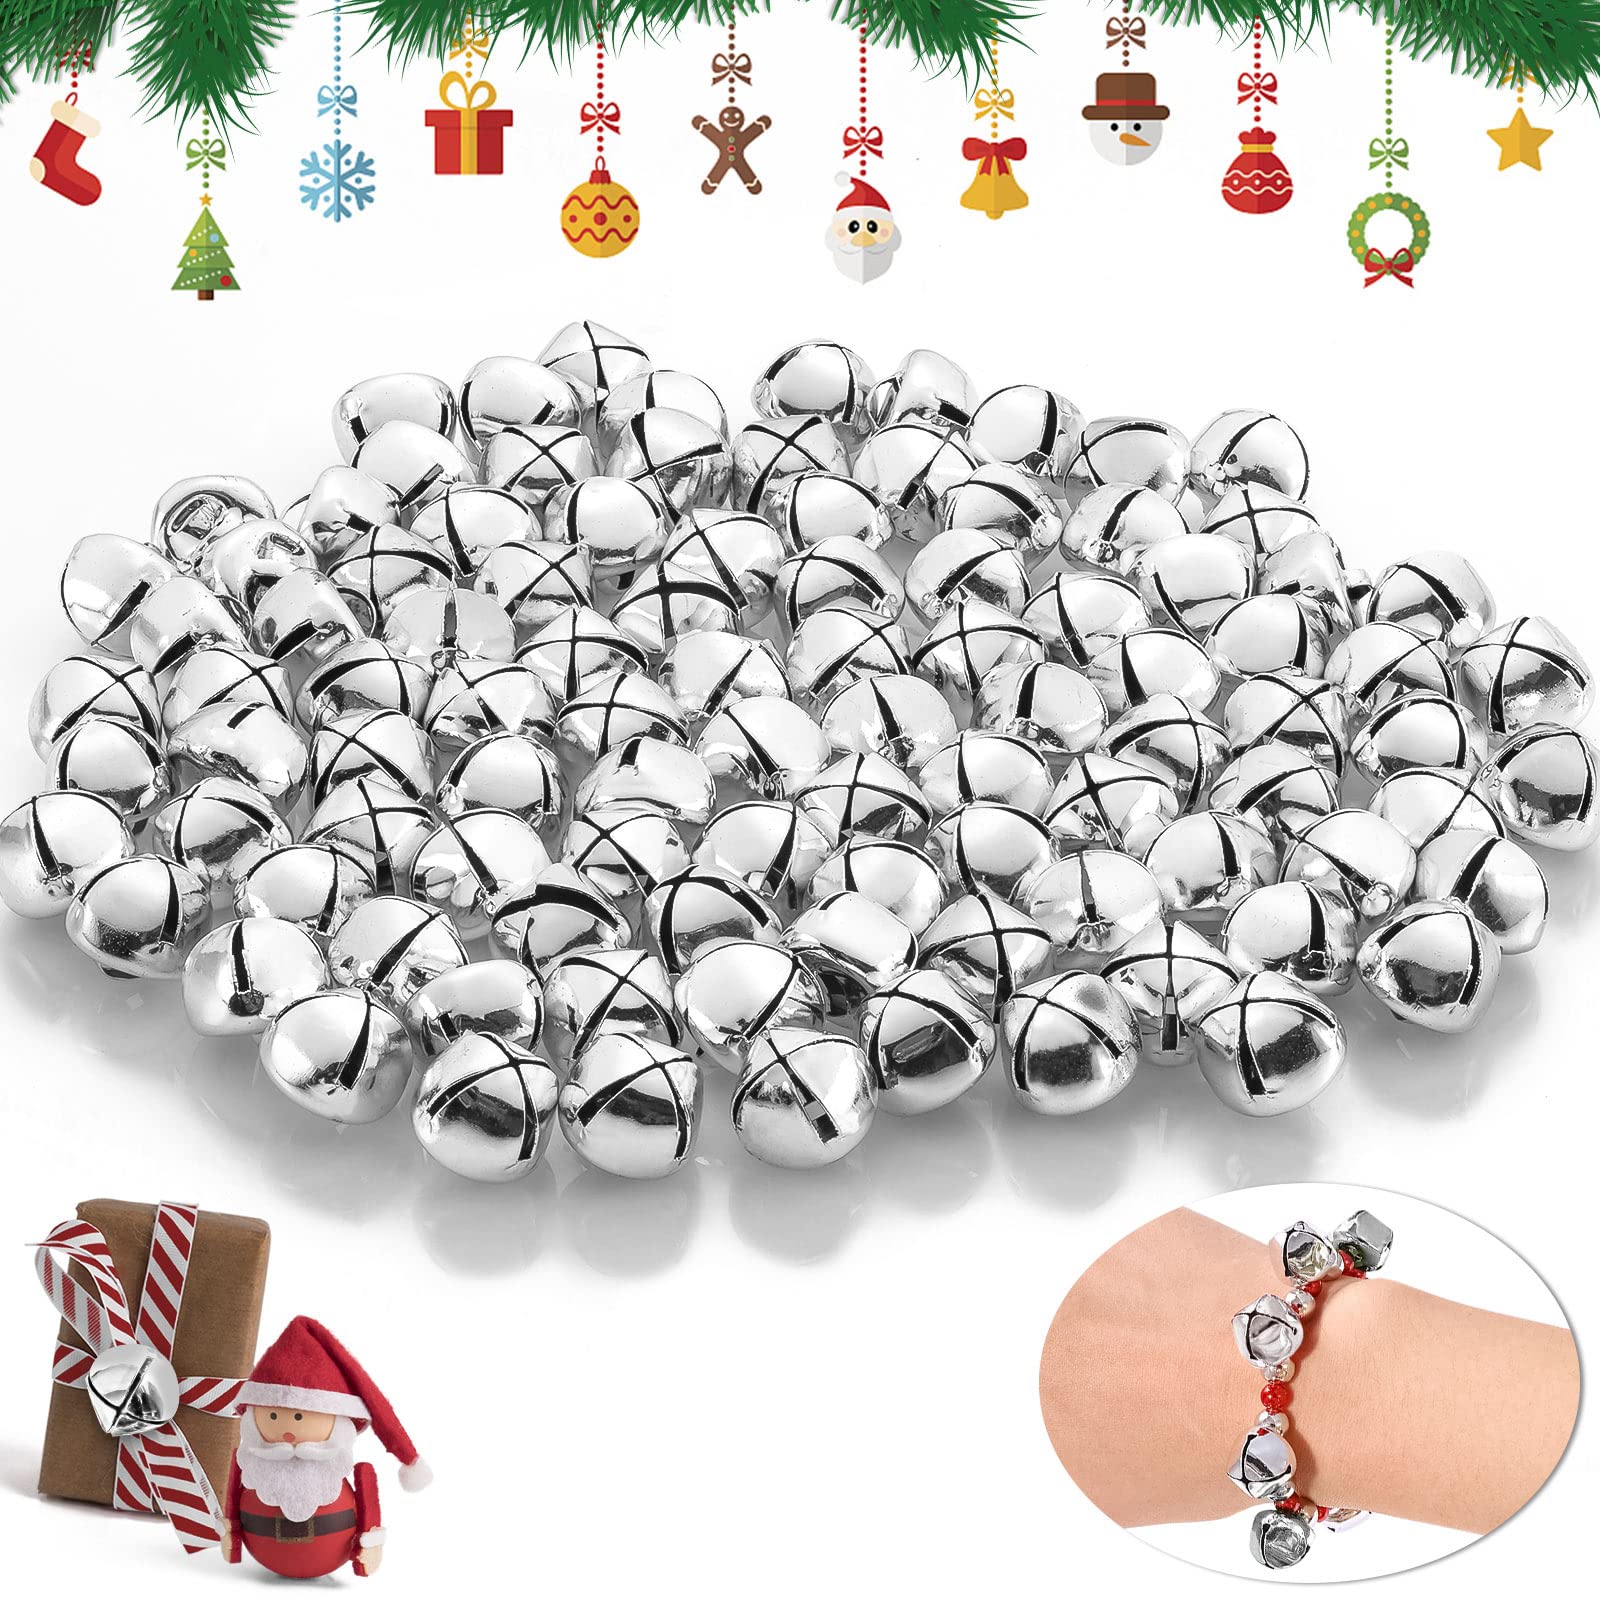 300pcs Small Bells Diy Mini Tiny Iron Jingle Bells With Hole For Craft  Jewelry Festival Birthday Decoration Giftcolorful